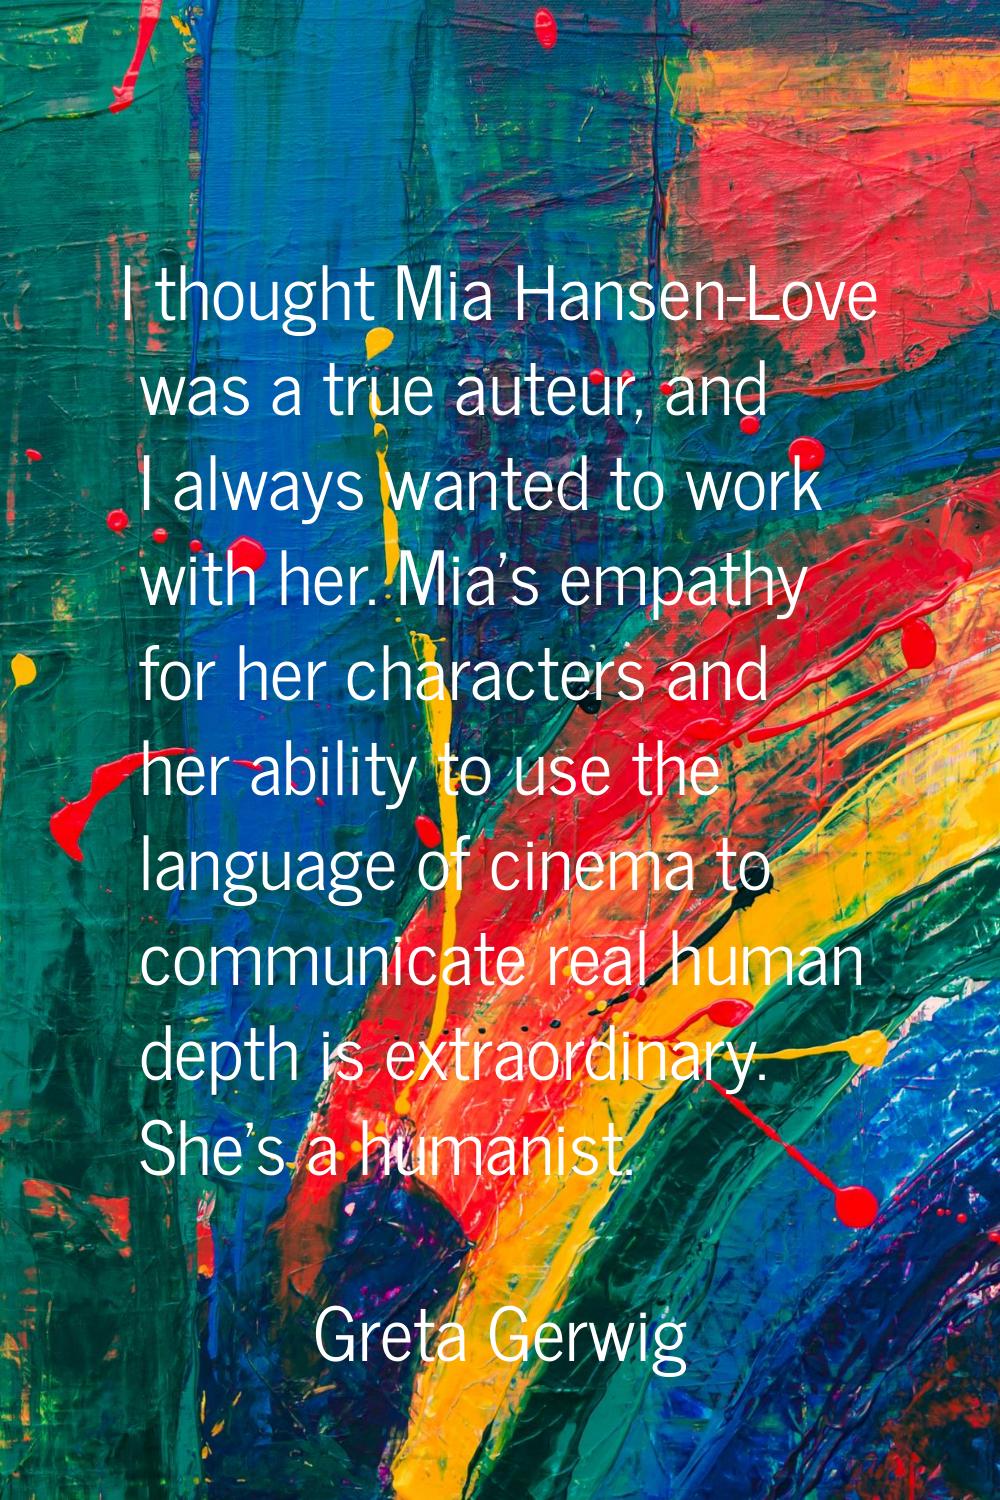 I thought Mia Hansen-Love was a true auteur, and I always wanted to work with her. Mia's empathy fo